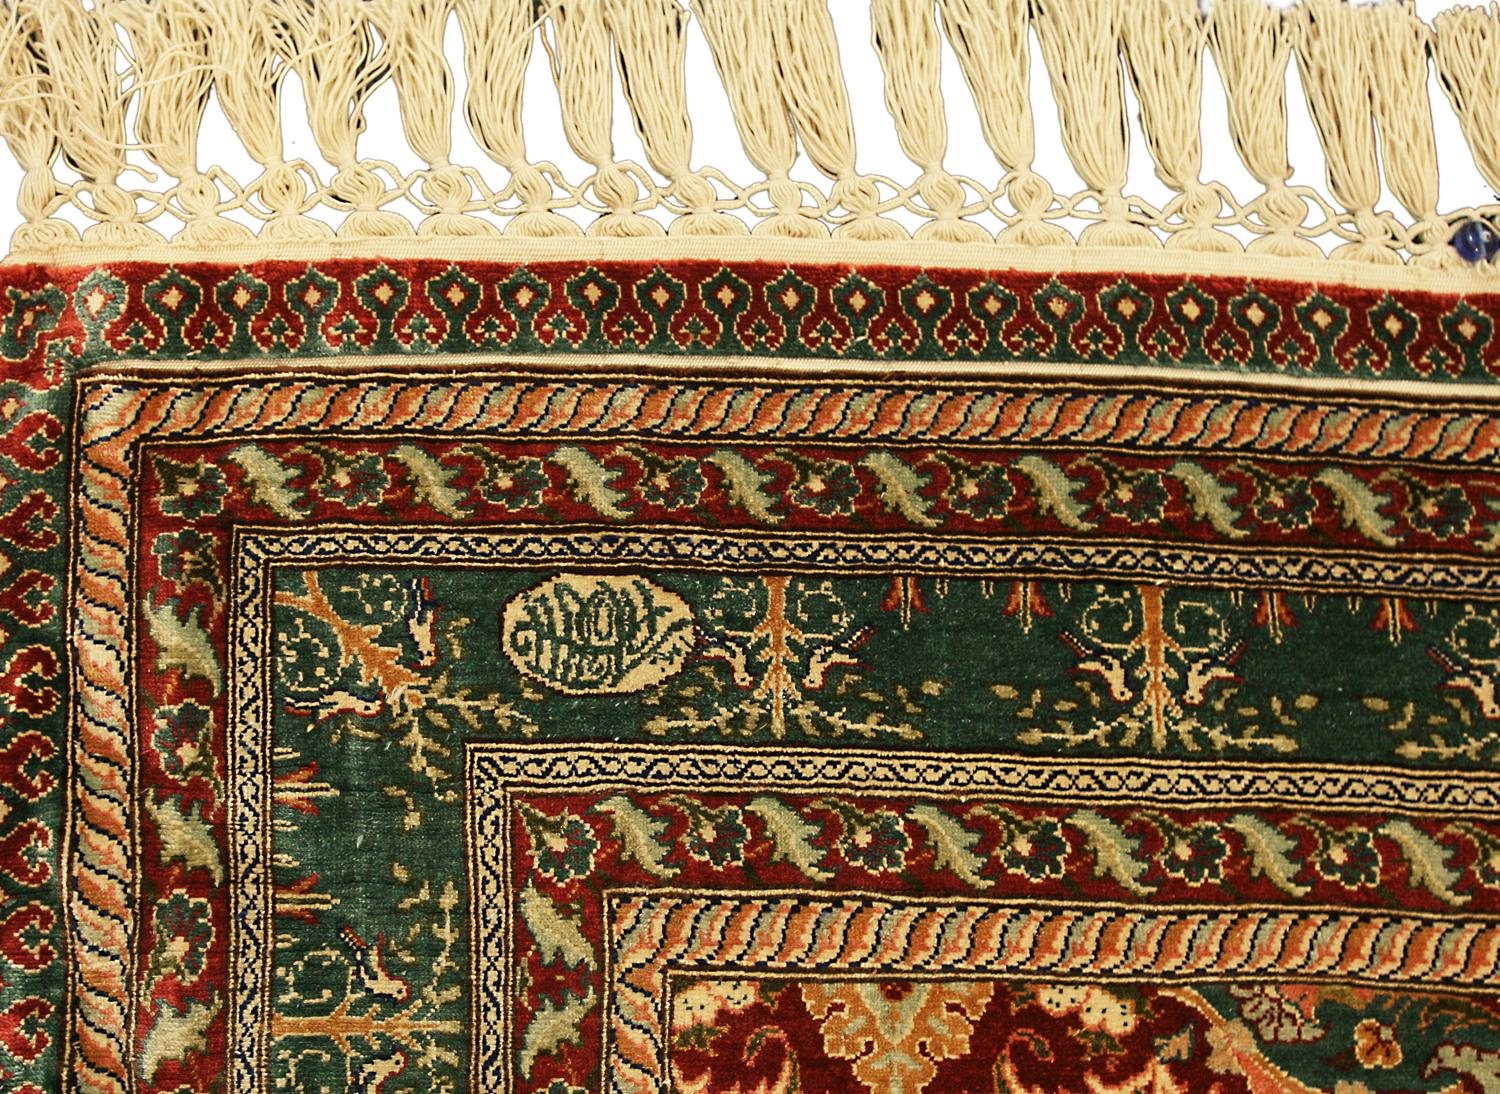 This is an extremely fine all silk and metal threaded Hereke rug woven in Turkey during the beginning of the 21st century circa 2000 – 2010 and measures 121x86 cm in size. It has an all-over design with repeating medallions surrounded by different